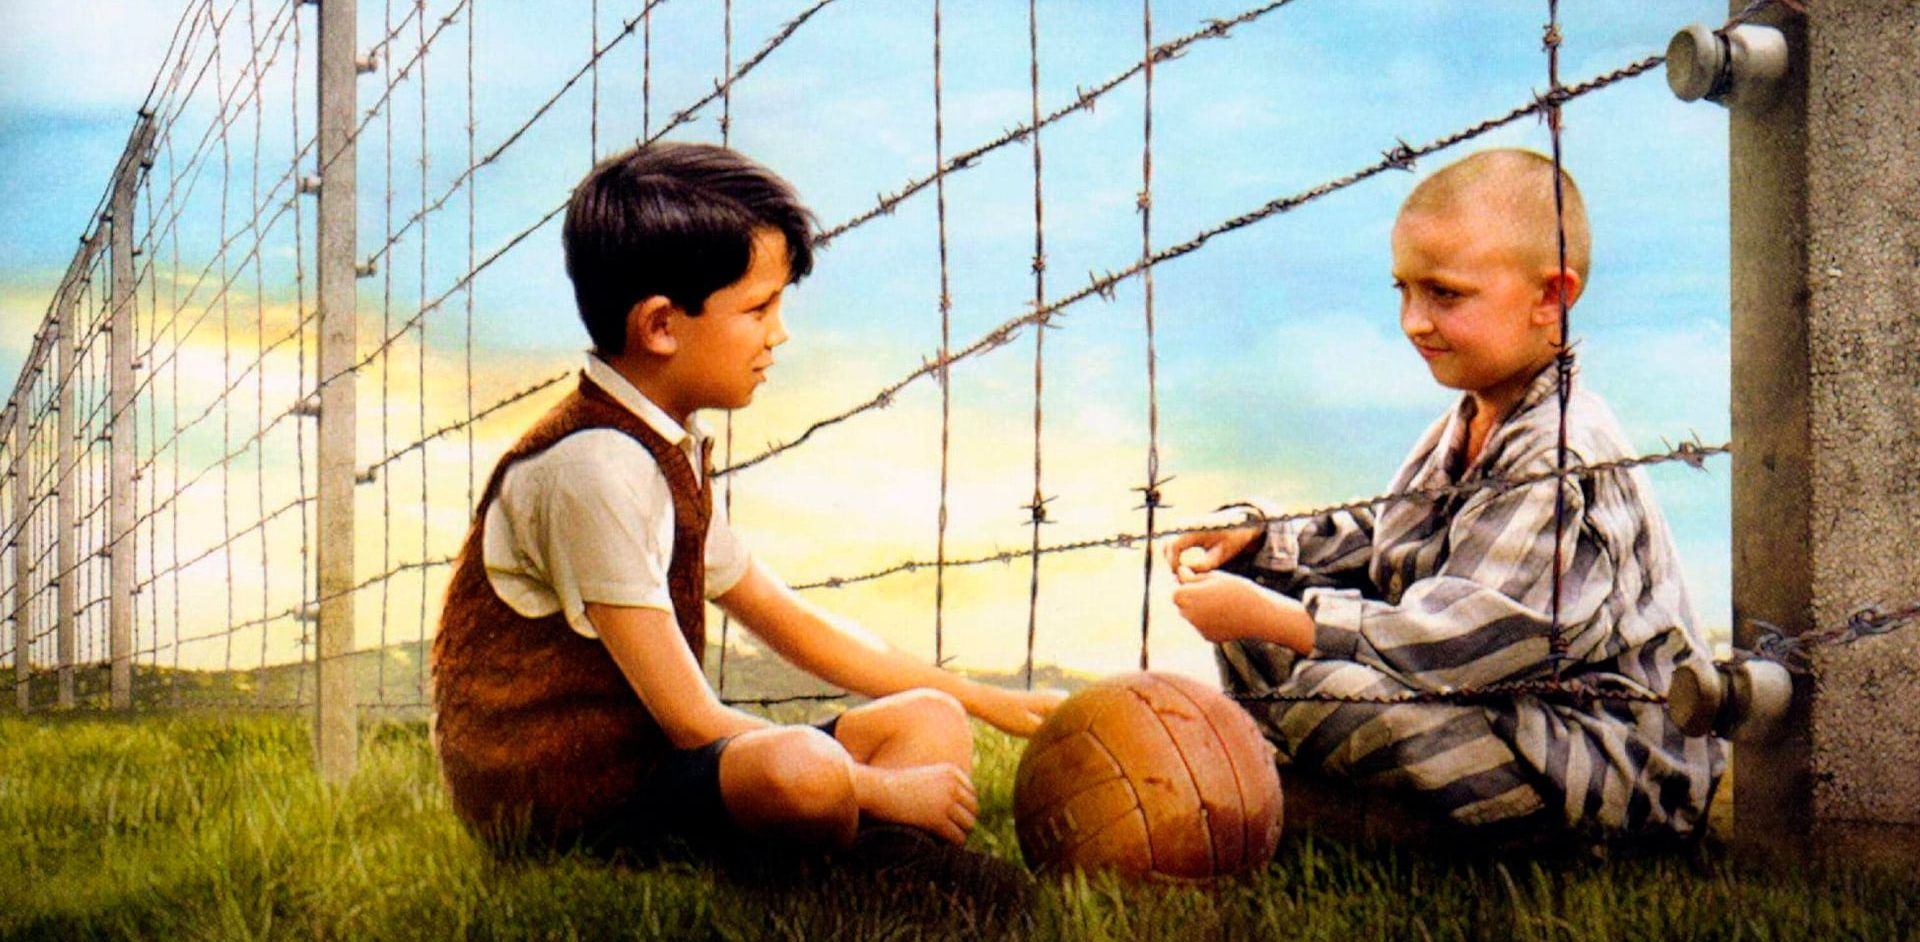 The Boy In the Striped Pajamas - Netflix